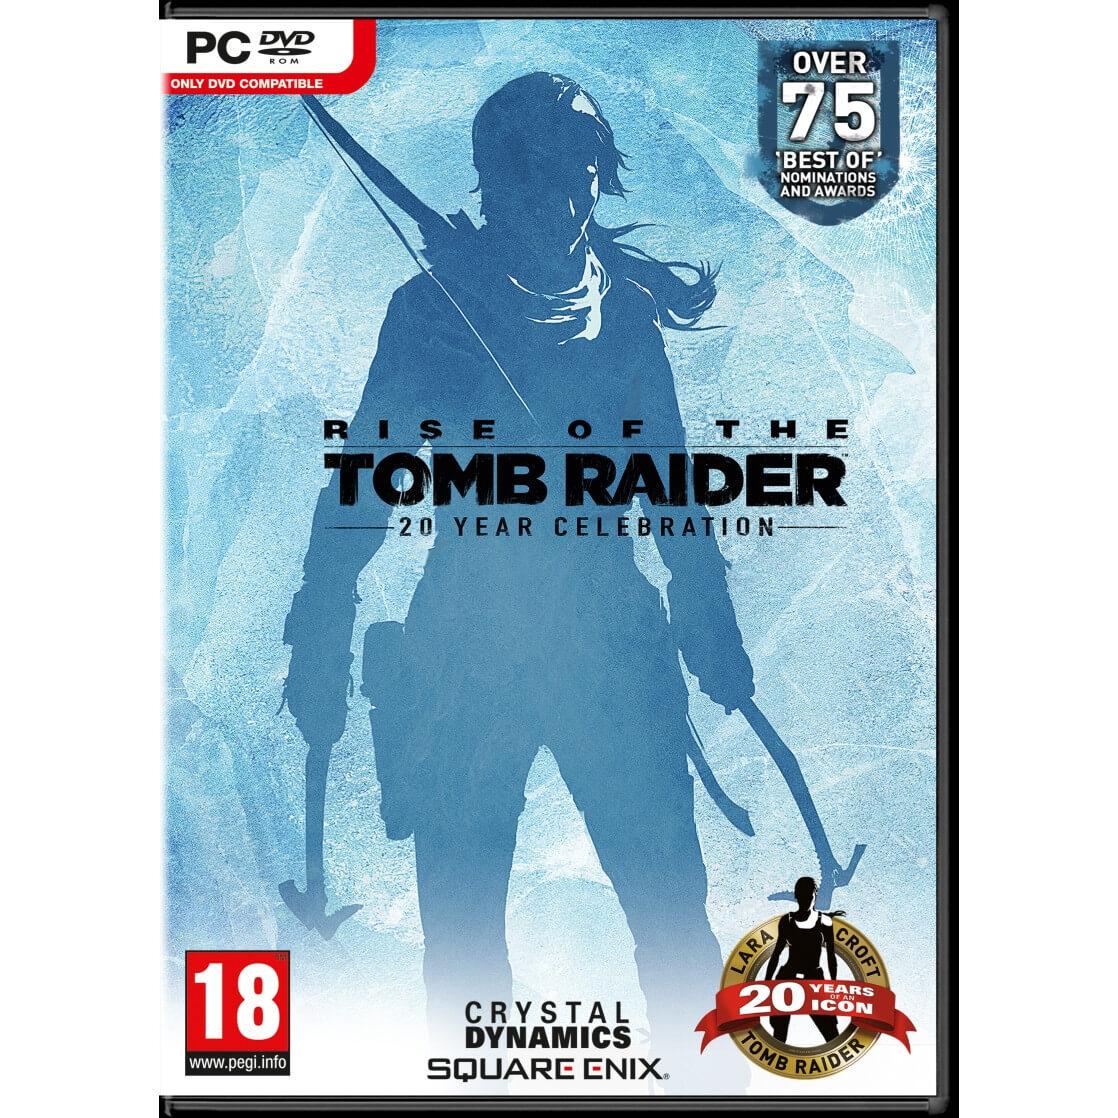 beyond the story 10 year record of bts Joc PC Rise of the Tomb Raider: 20 Year Celebration